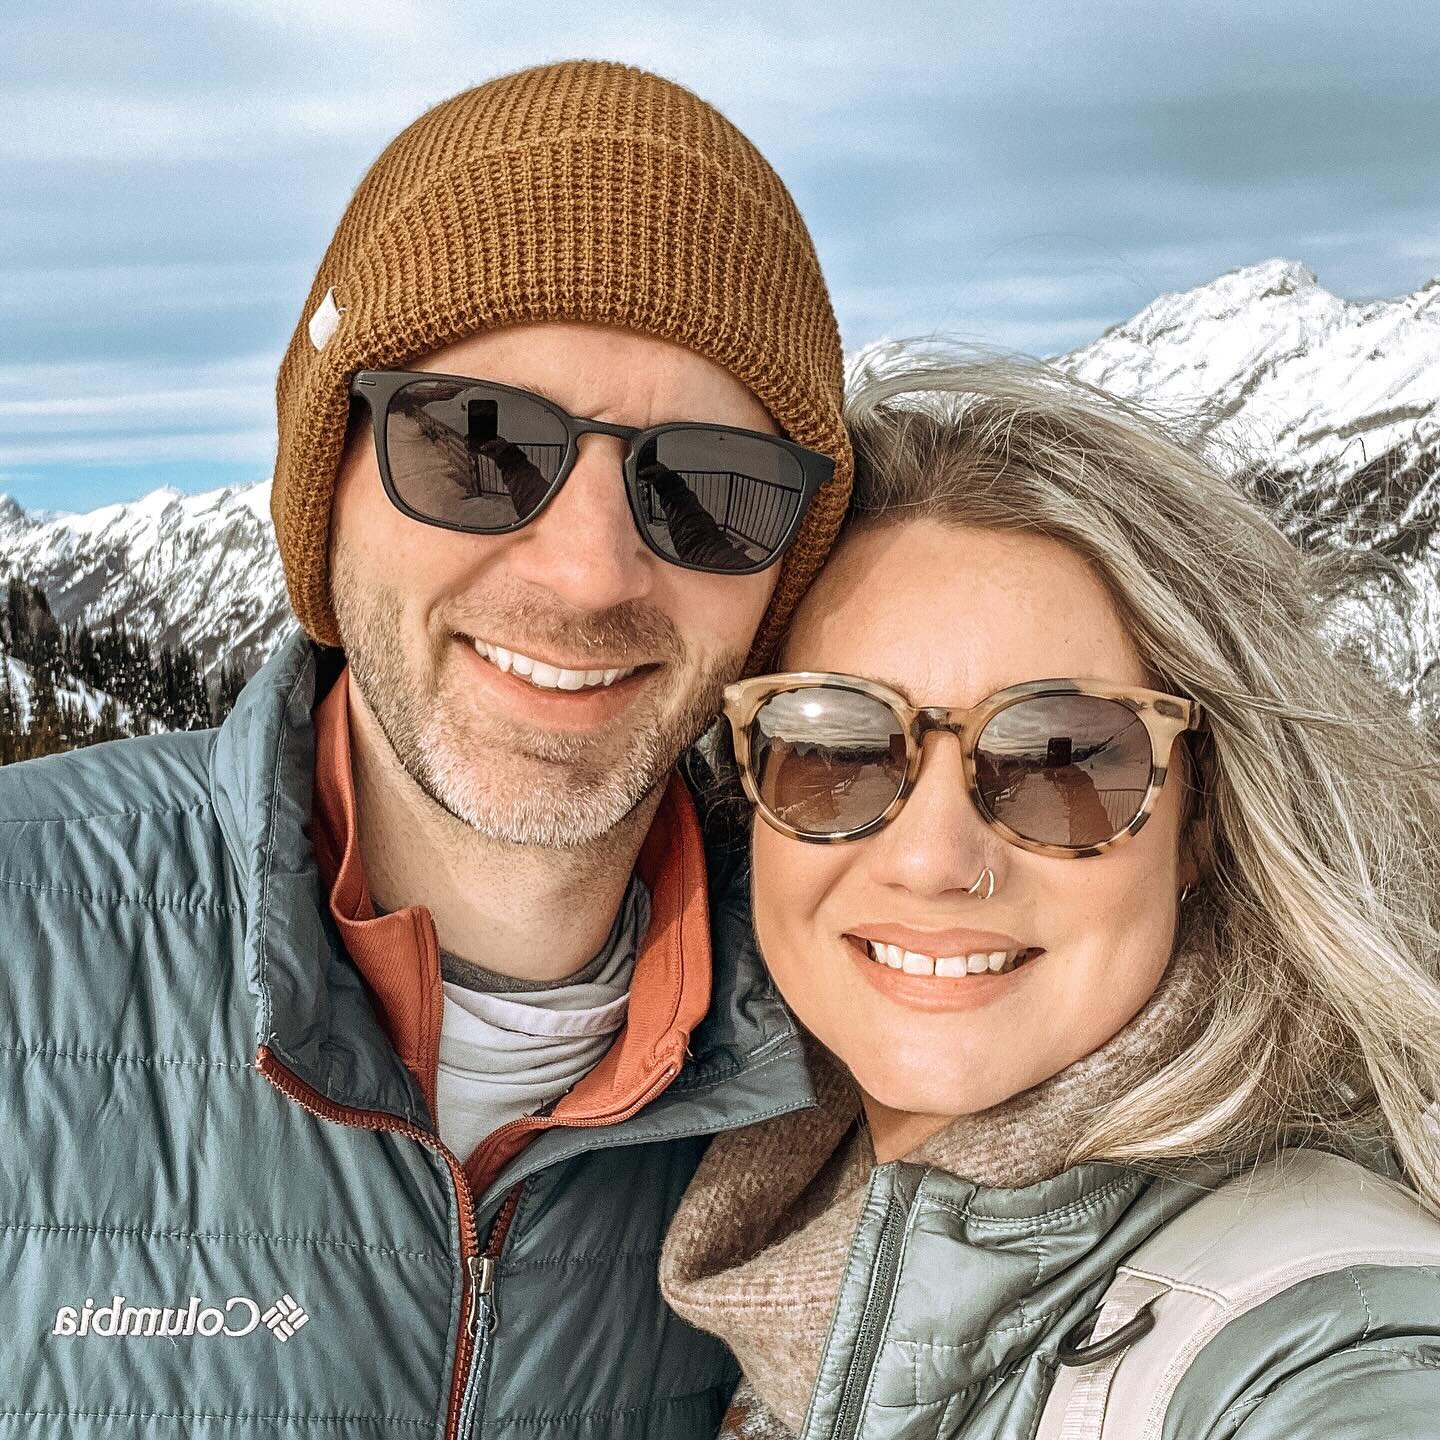 🇨🇦 CANADA APPRECIATION POST 🇨🇦

Just kidding&hellip;this trip was more about the cute guy I got to share my landscape selfies with while we celebrated a milestone anniversary (15!) and a milestone birthday for him (40!). 

I am still trying to pr